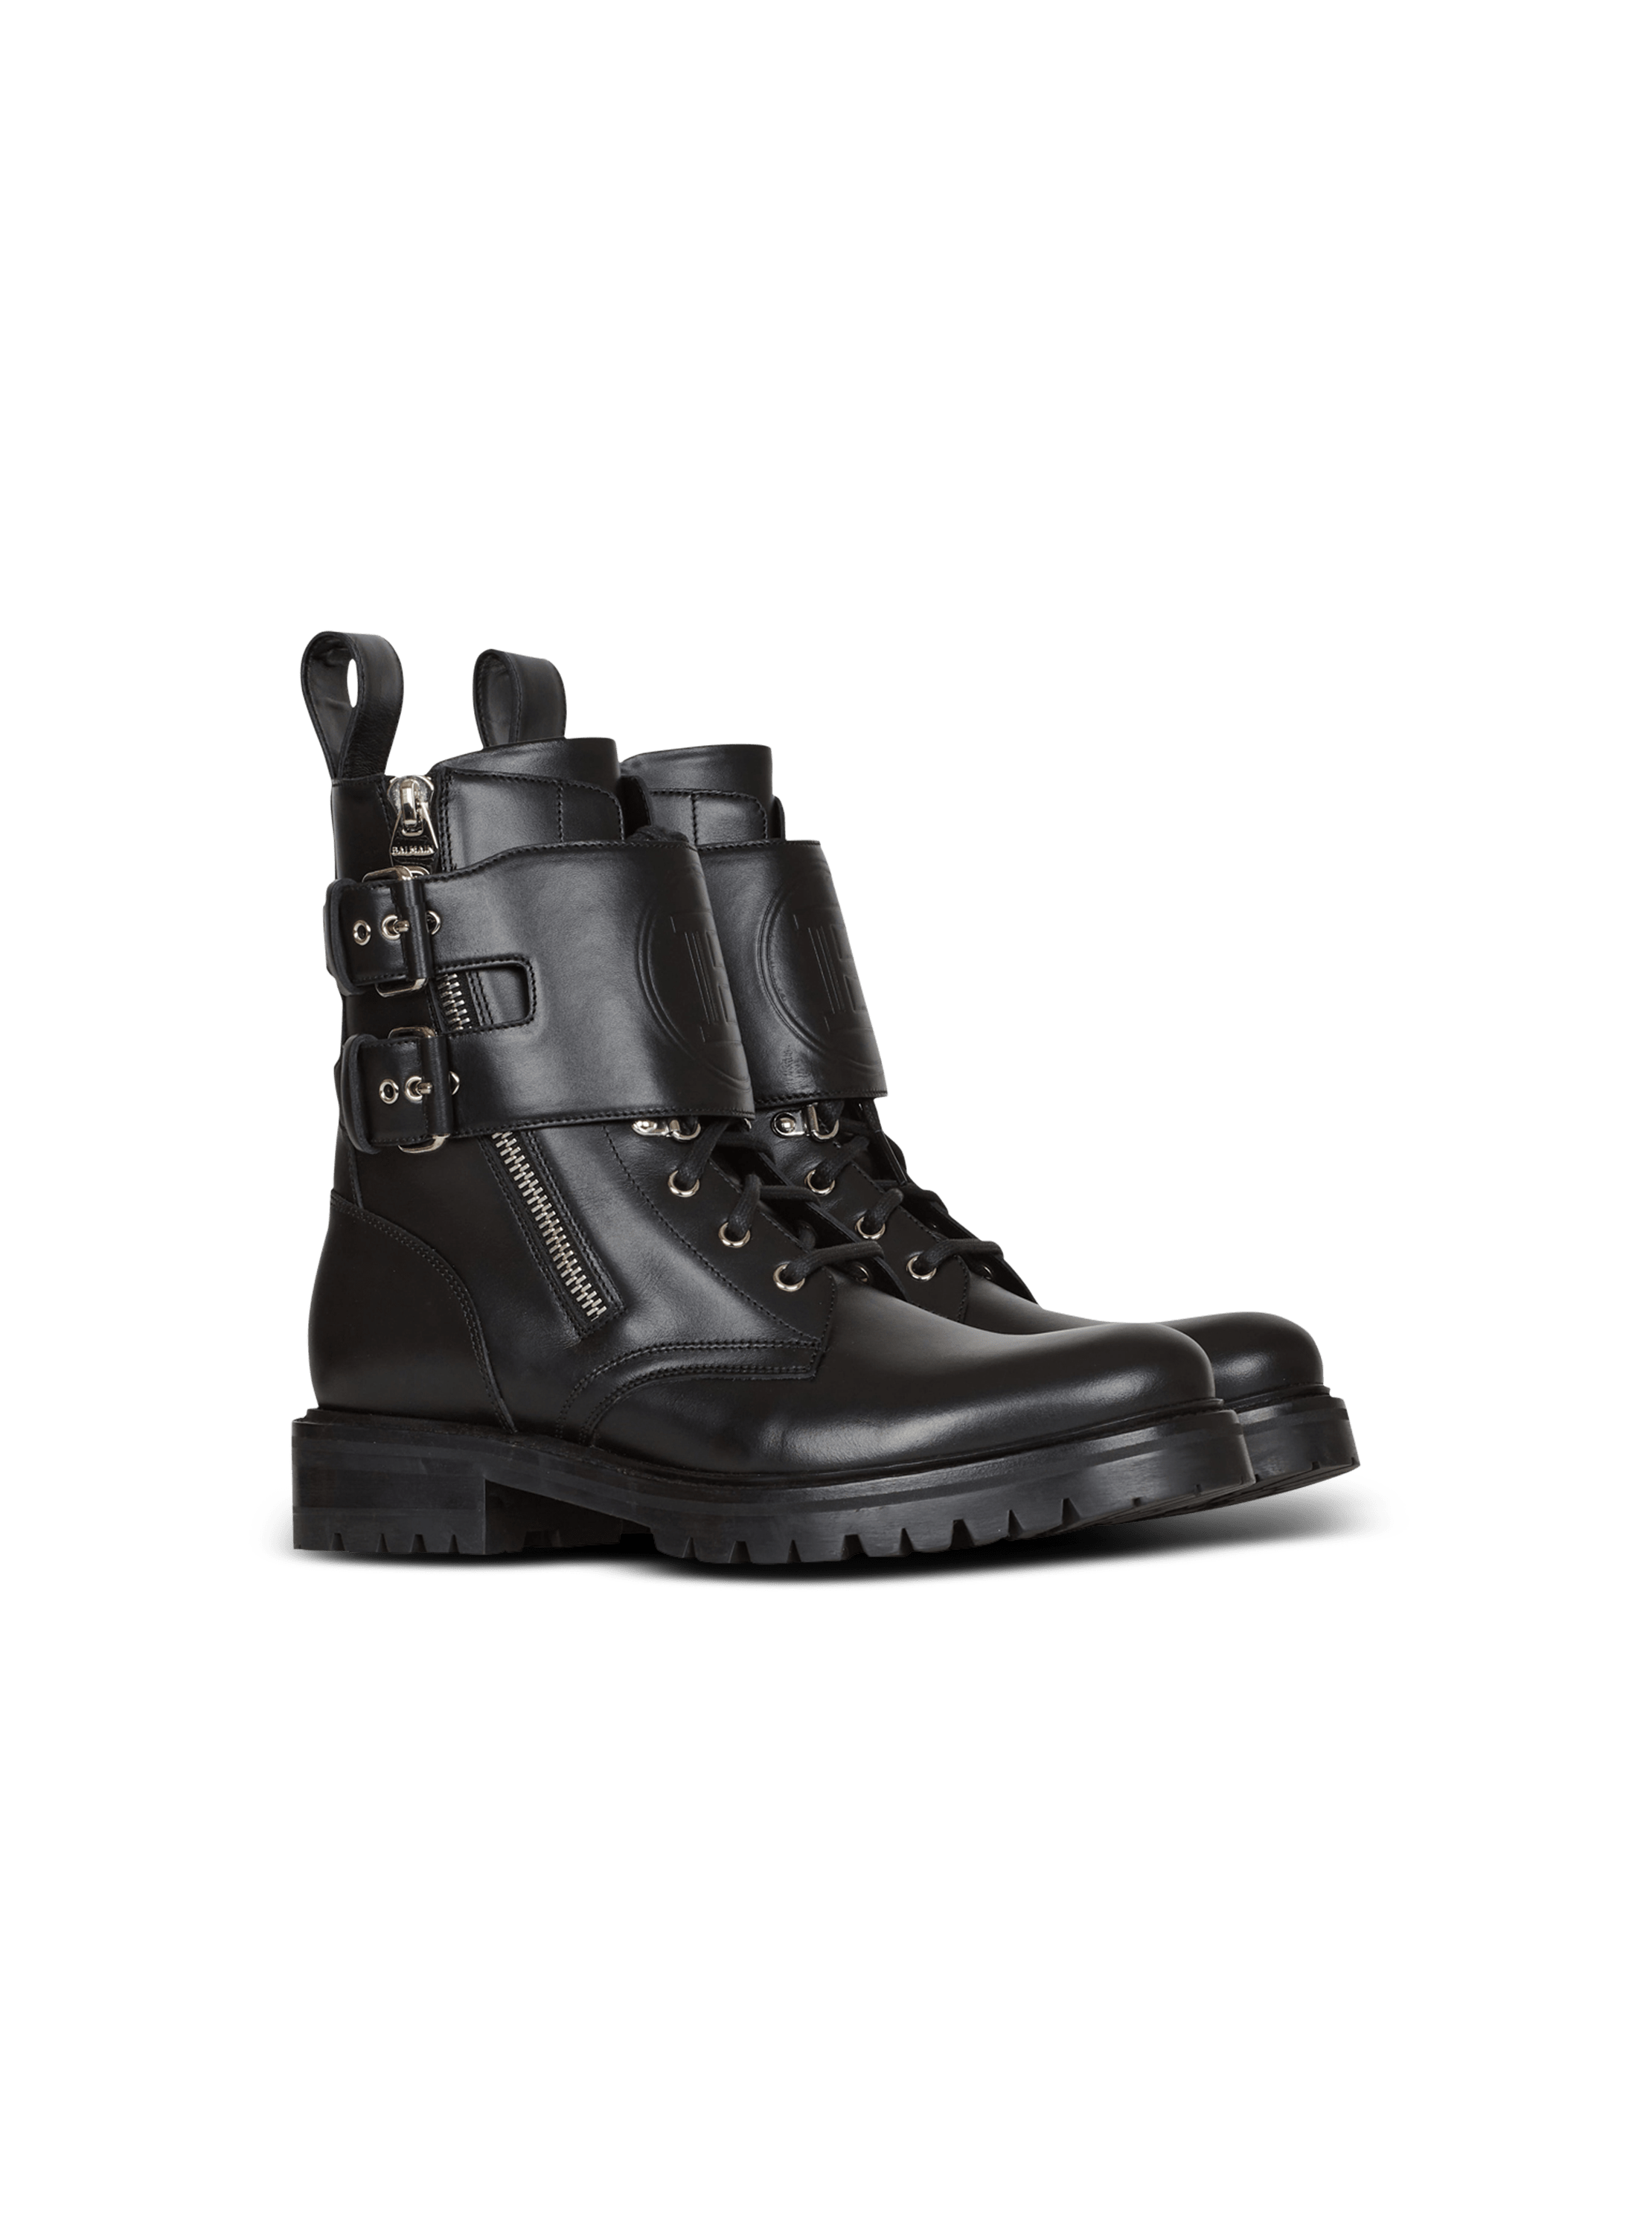 Tag væk Kano Ofre Smooth leather Phil Ranger ankle boots - Men | BALMAIN